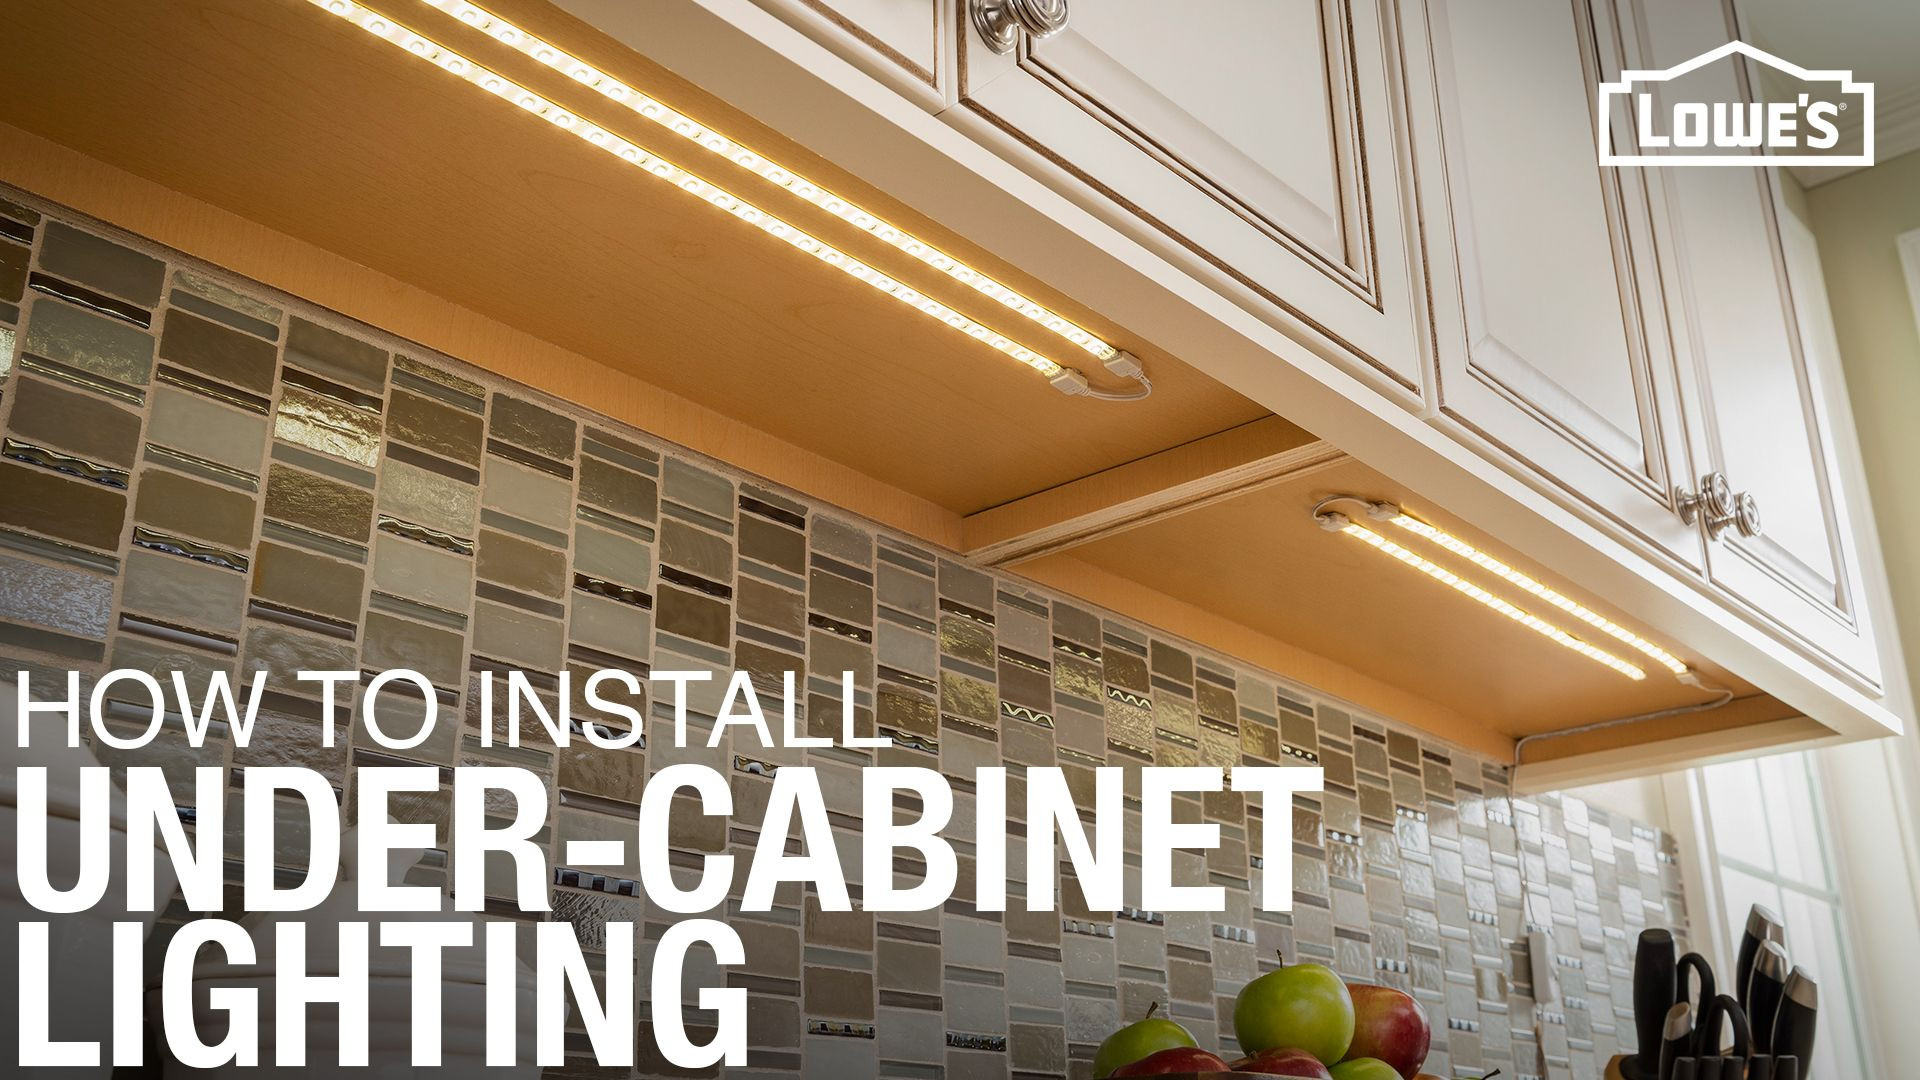 Under The Kitchen Cabinet Lighting
 How to Install Under Cabinet Lighting